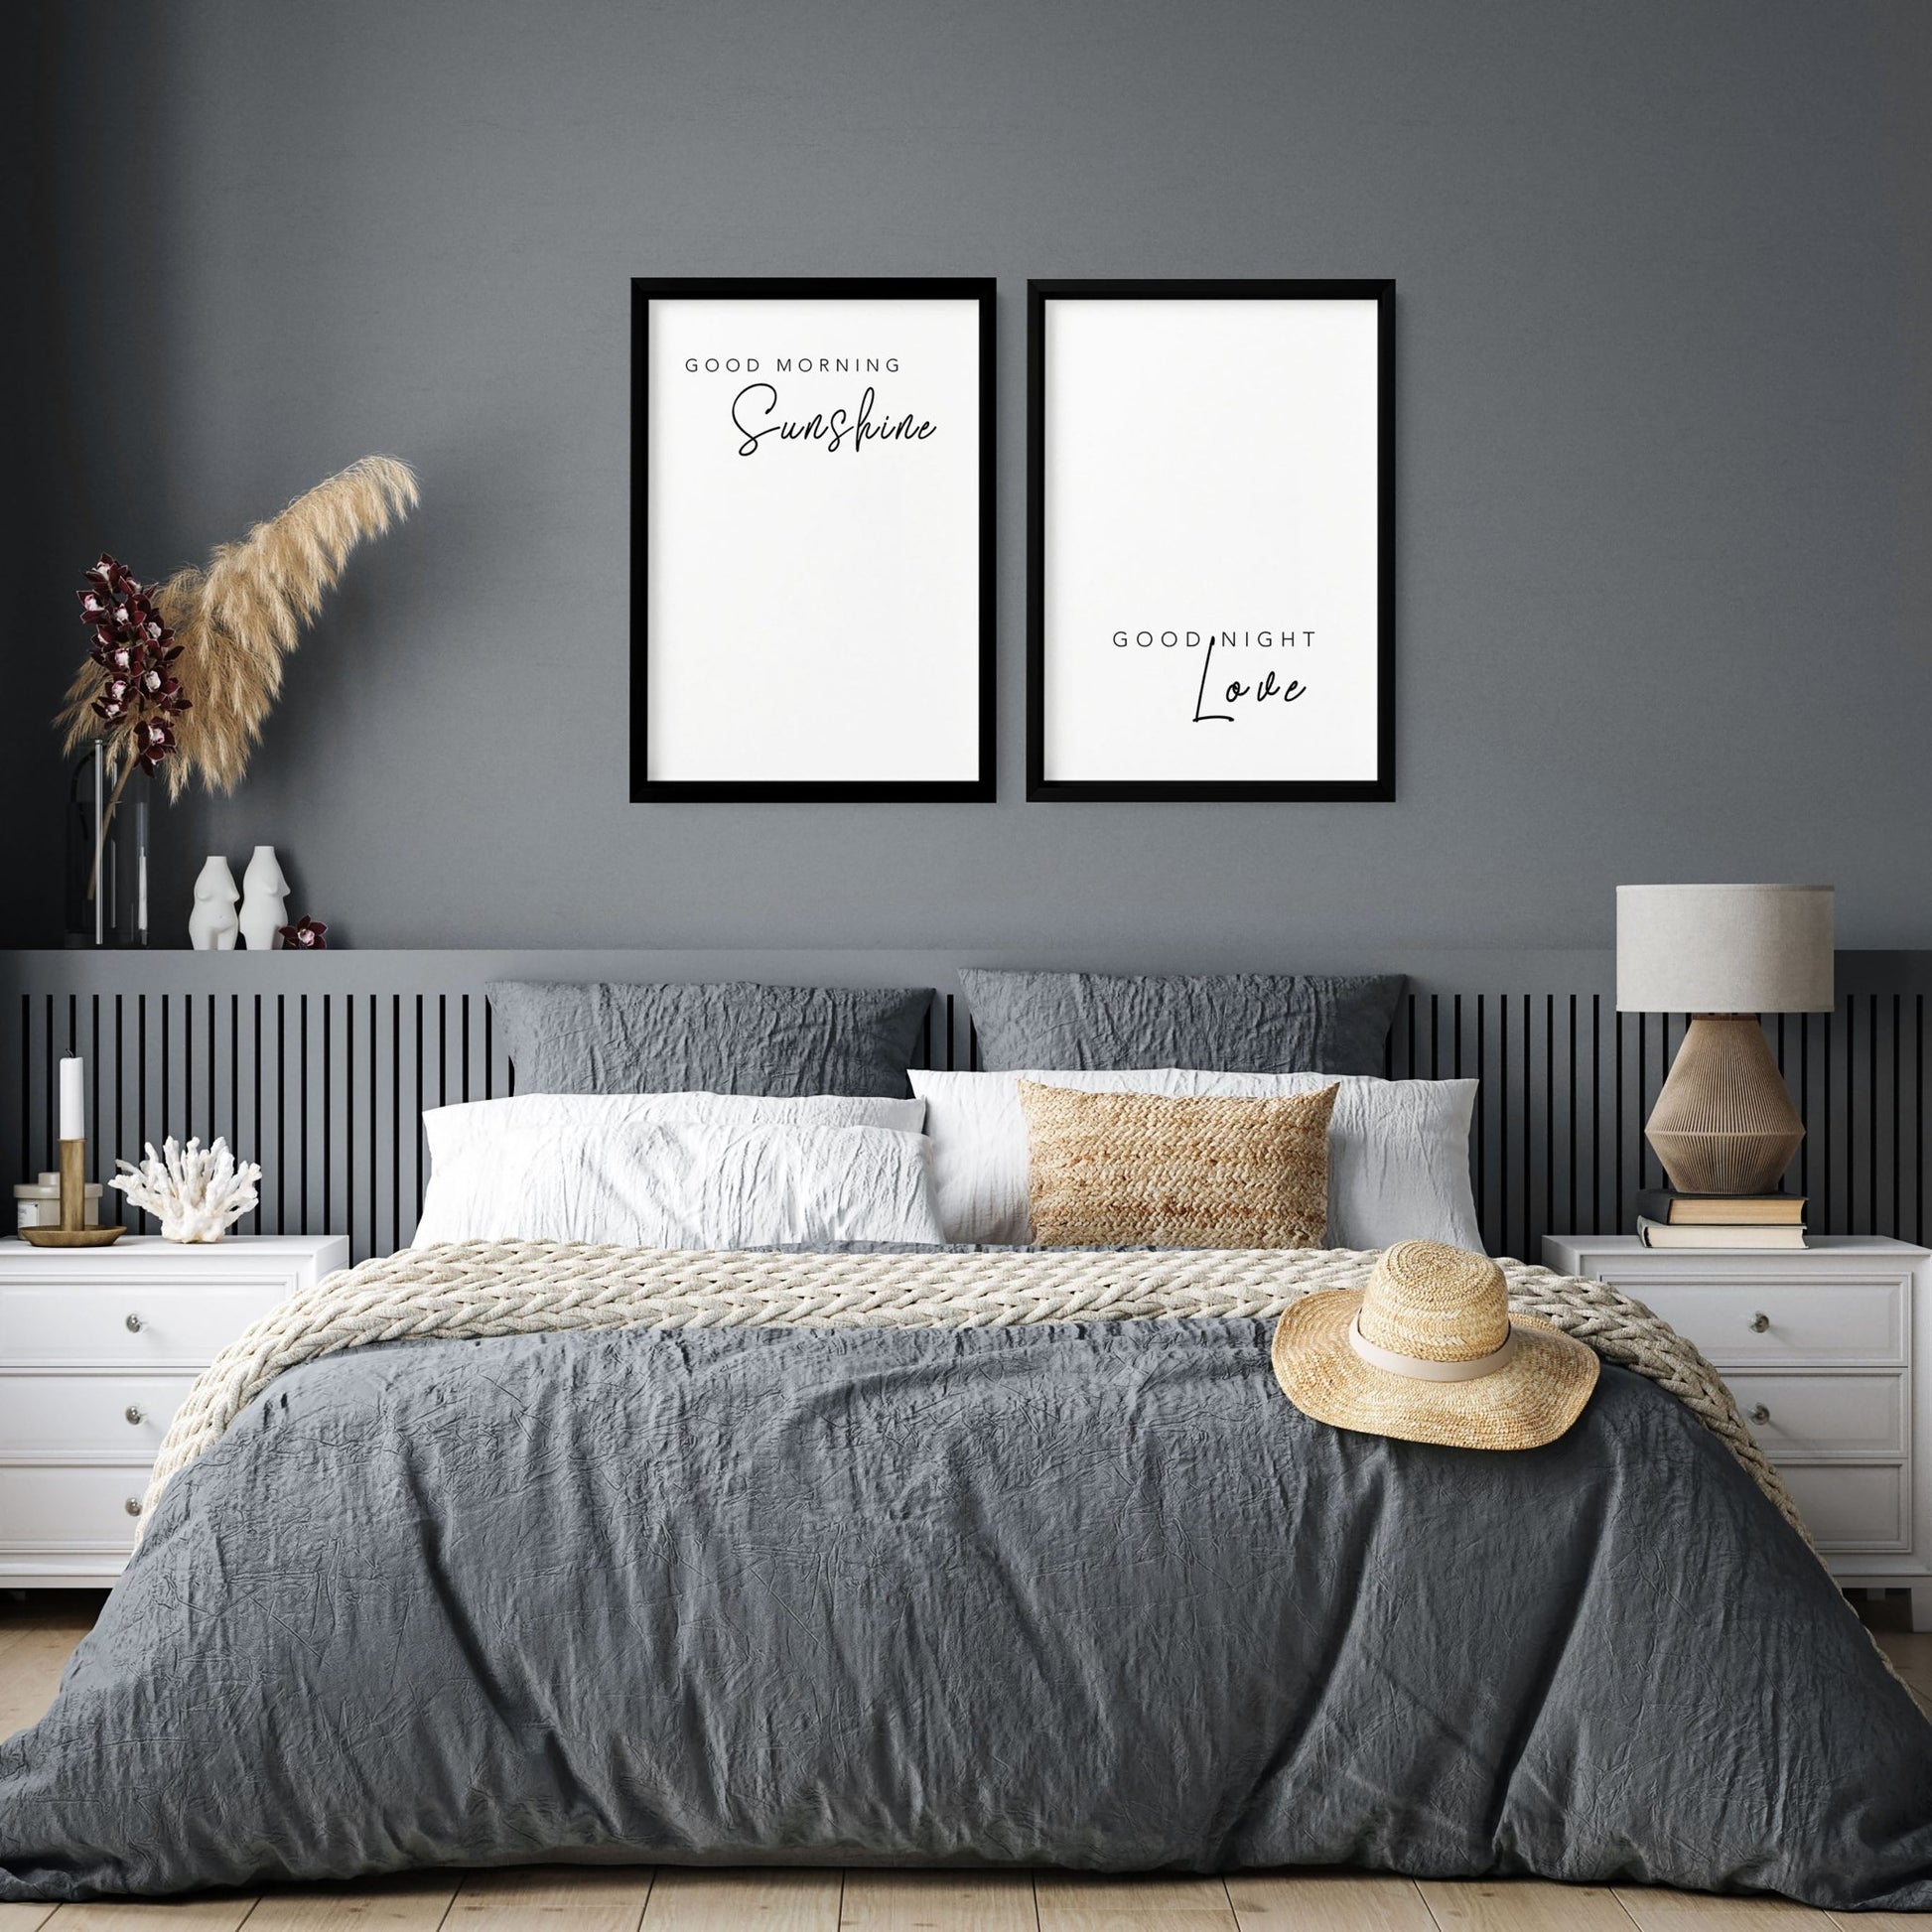 First anniversary gifts| set of 2 wall art prints for Master Bedroom - About Wall Art